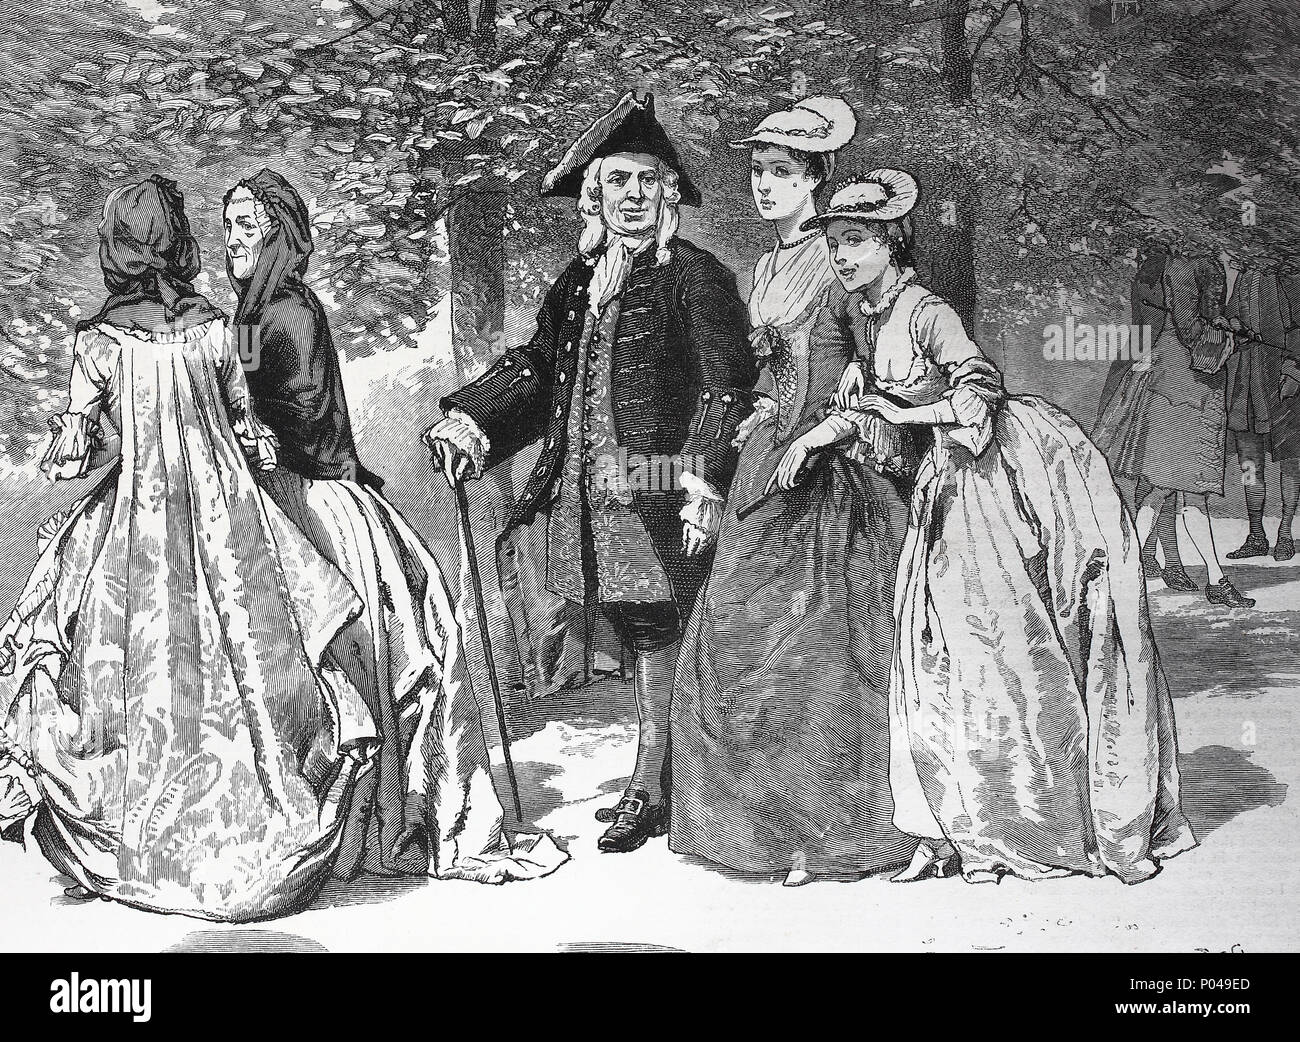 We fell, presently, into a sort of procession, a group of people walking in the park, digital improved reproduction of an original print from the year 1881 Stock Photo